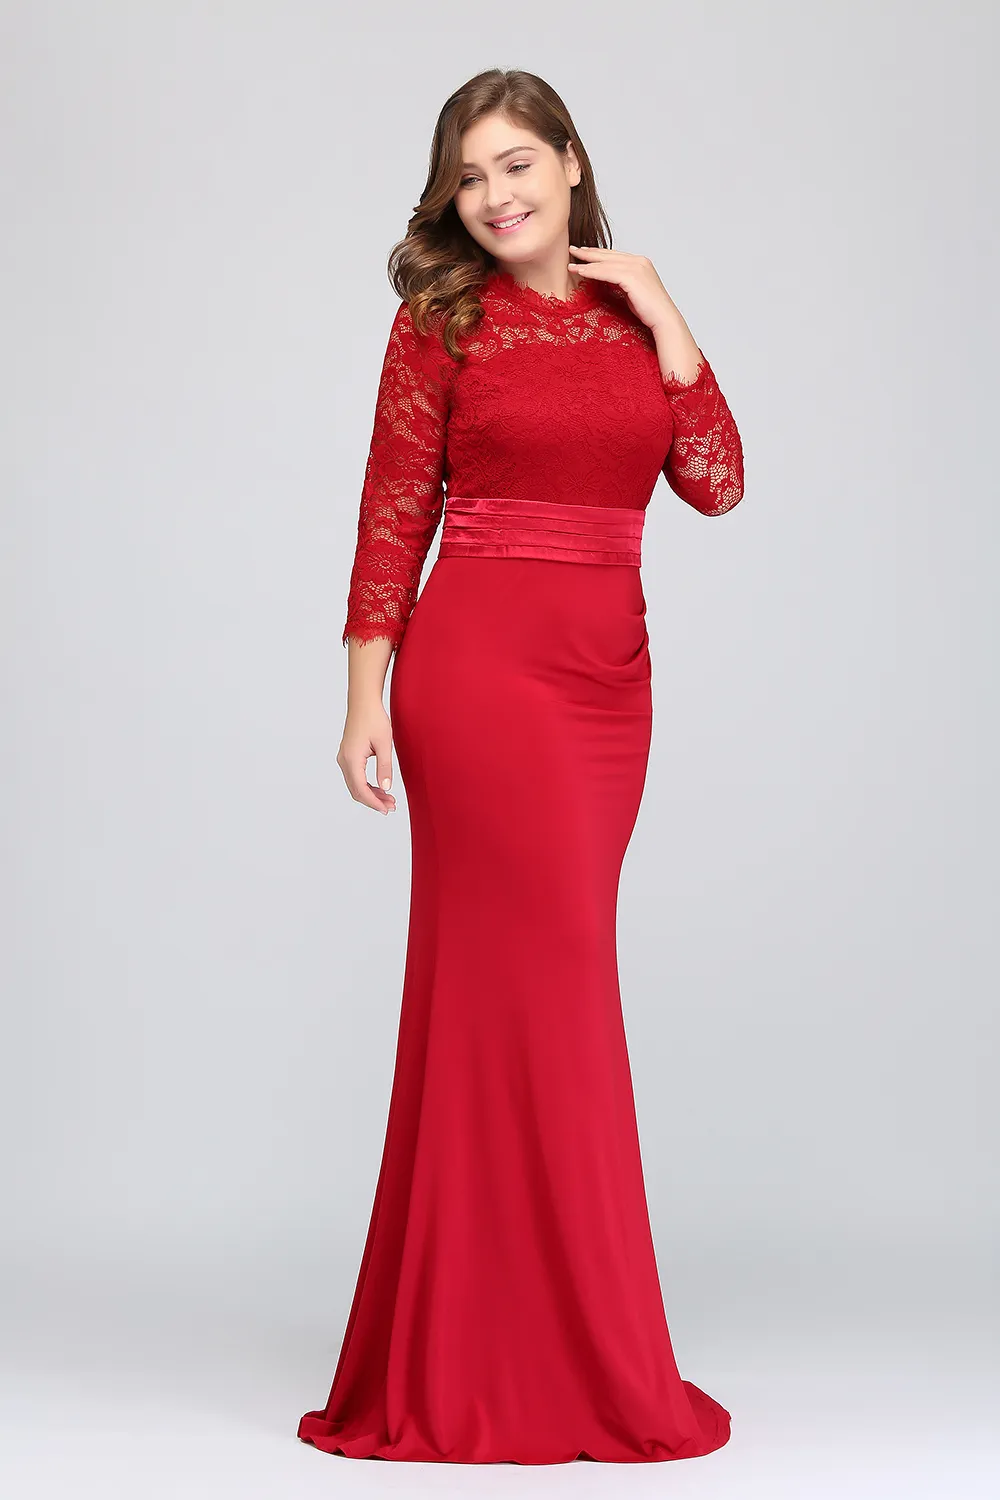 Plus Size 2018 Real Pictures Cheap Bridesmaid Dresses Long Chiffon ALine Formal Dresses Modest Special Occasion Evening Gowns CPS2647974